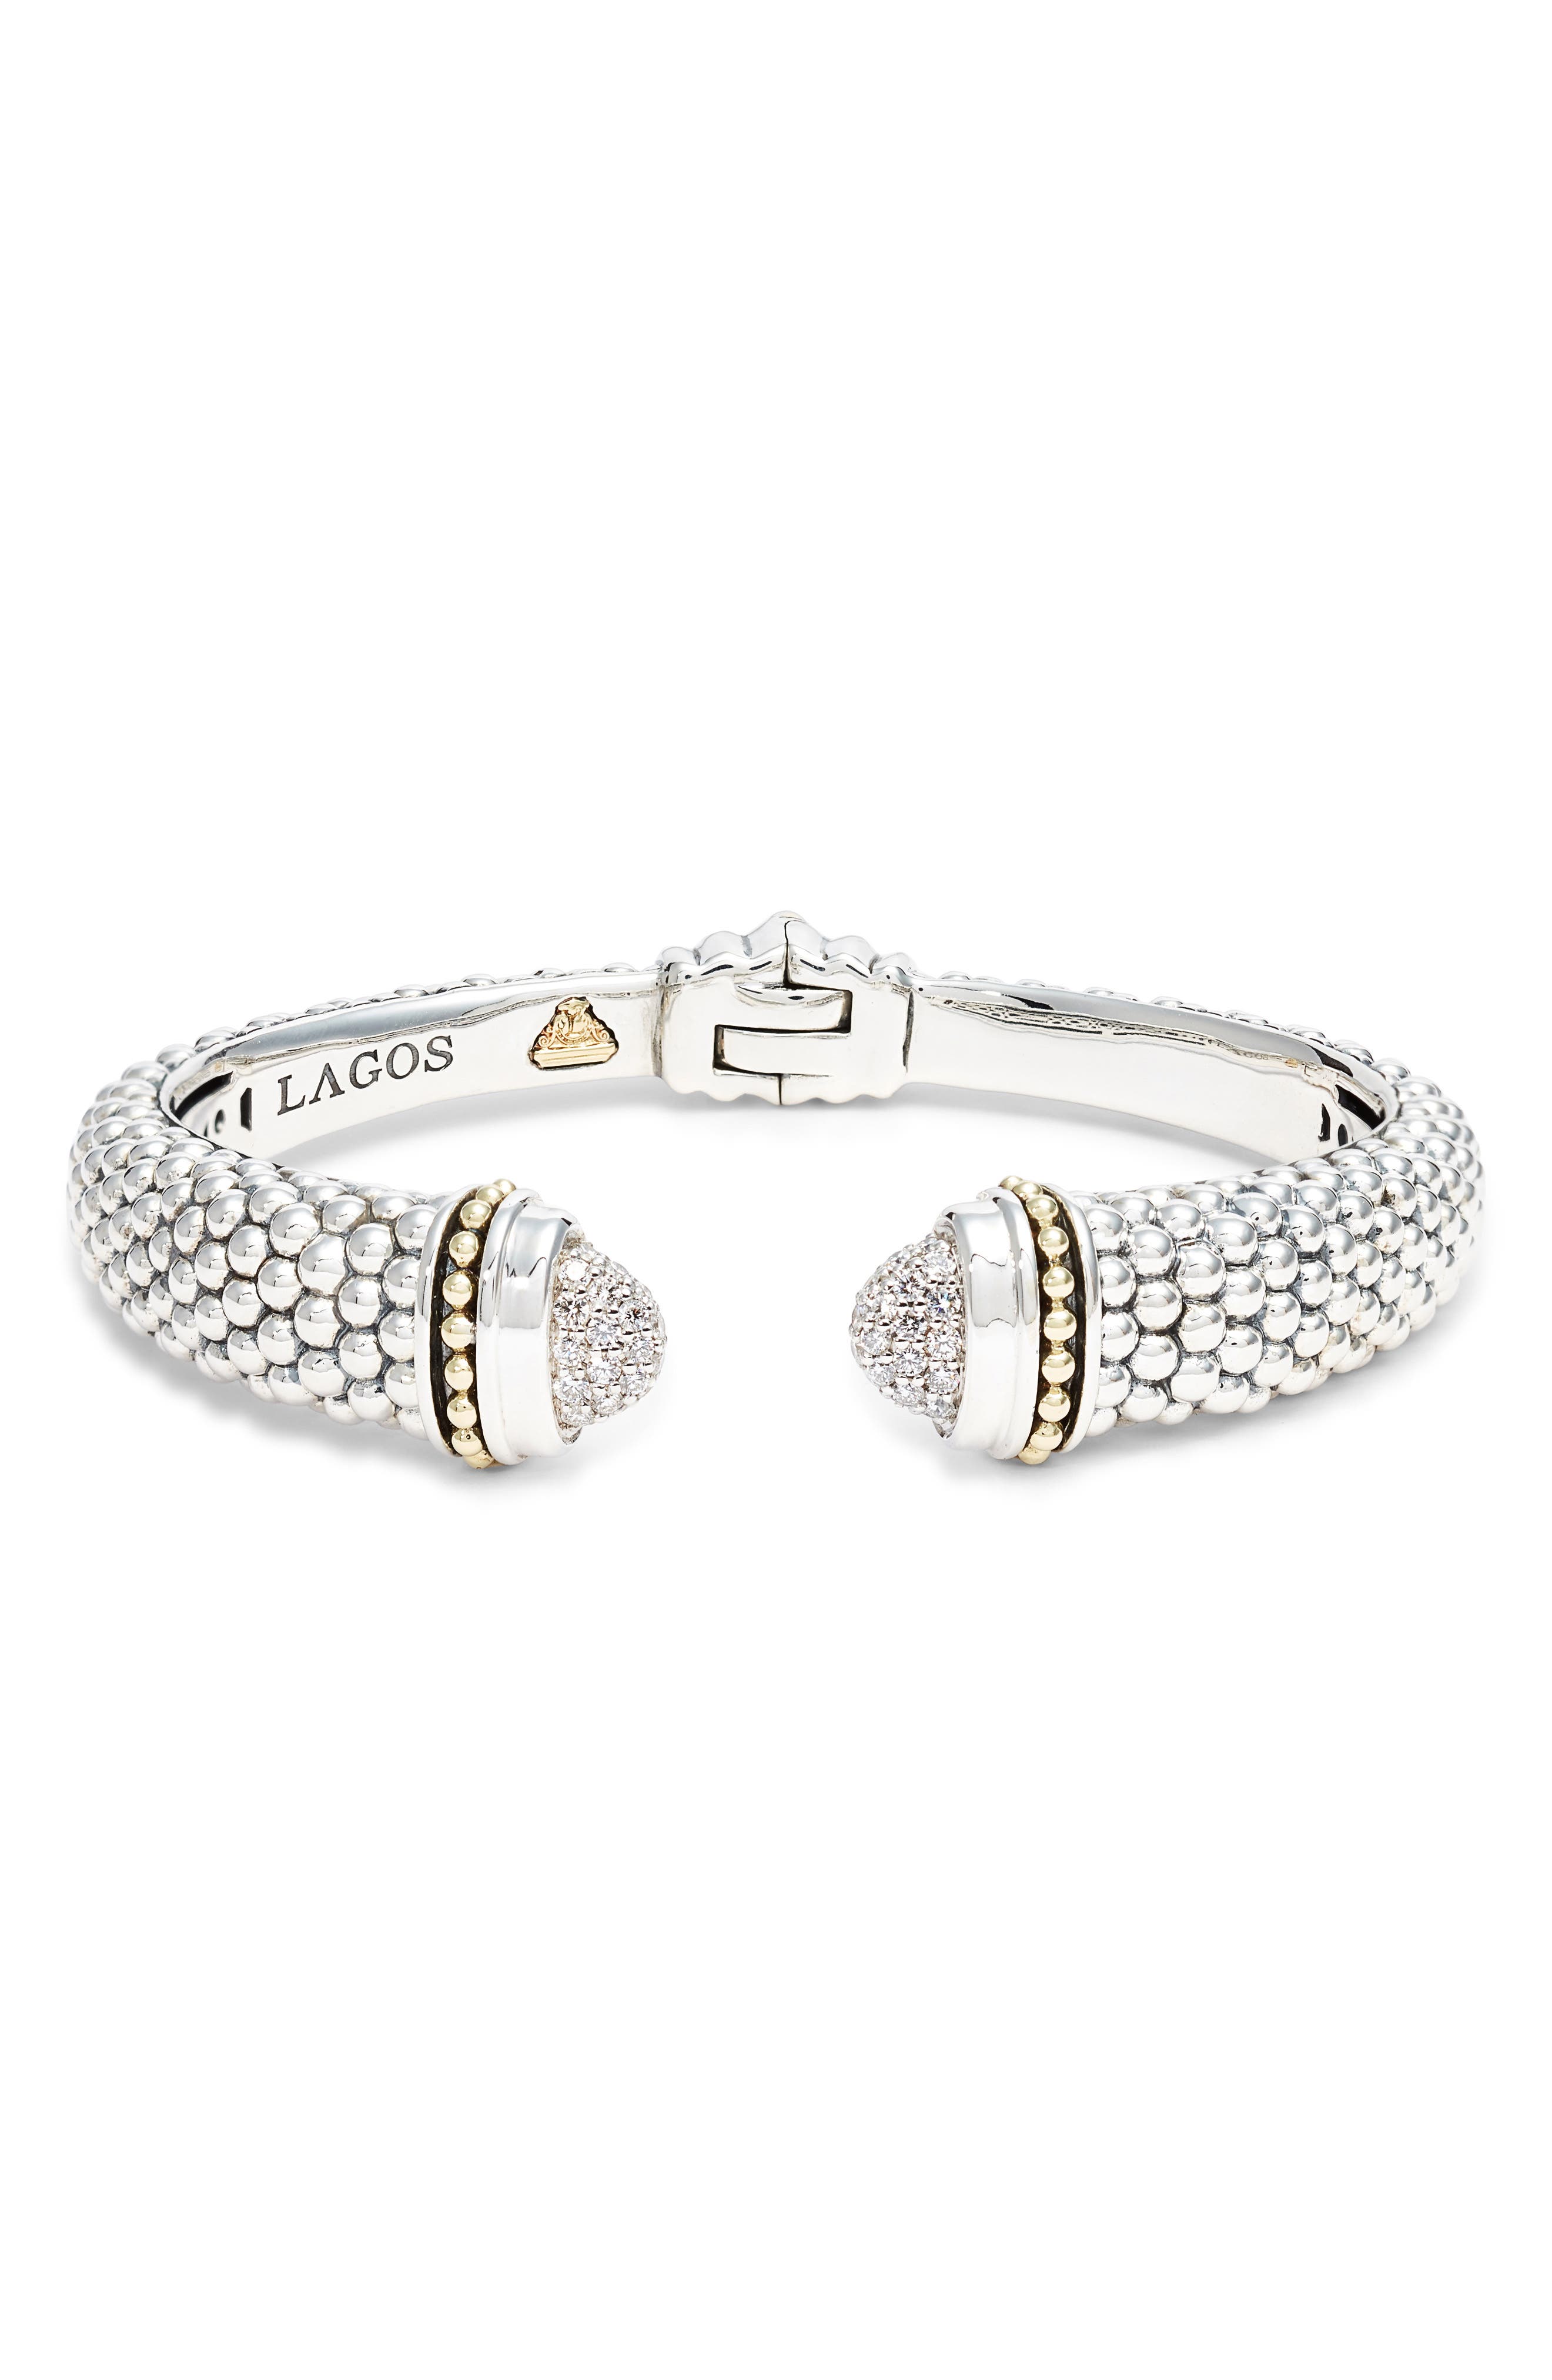 Womens Lagos Caviar Diamond Cuff Shop And Save Up To 70 At The Lux Outfit